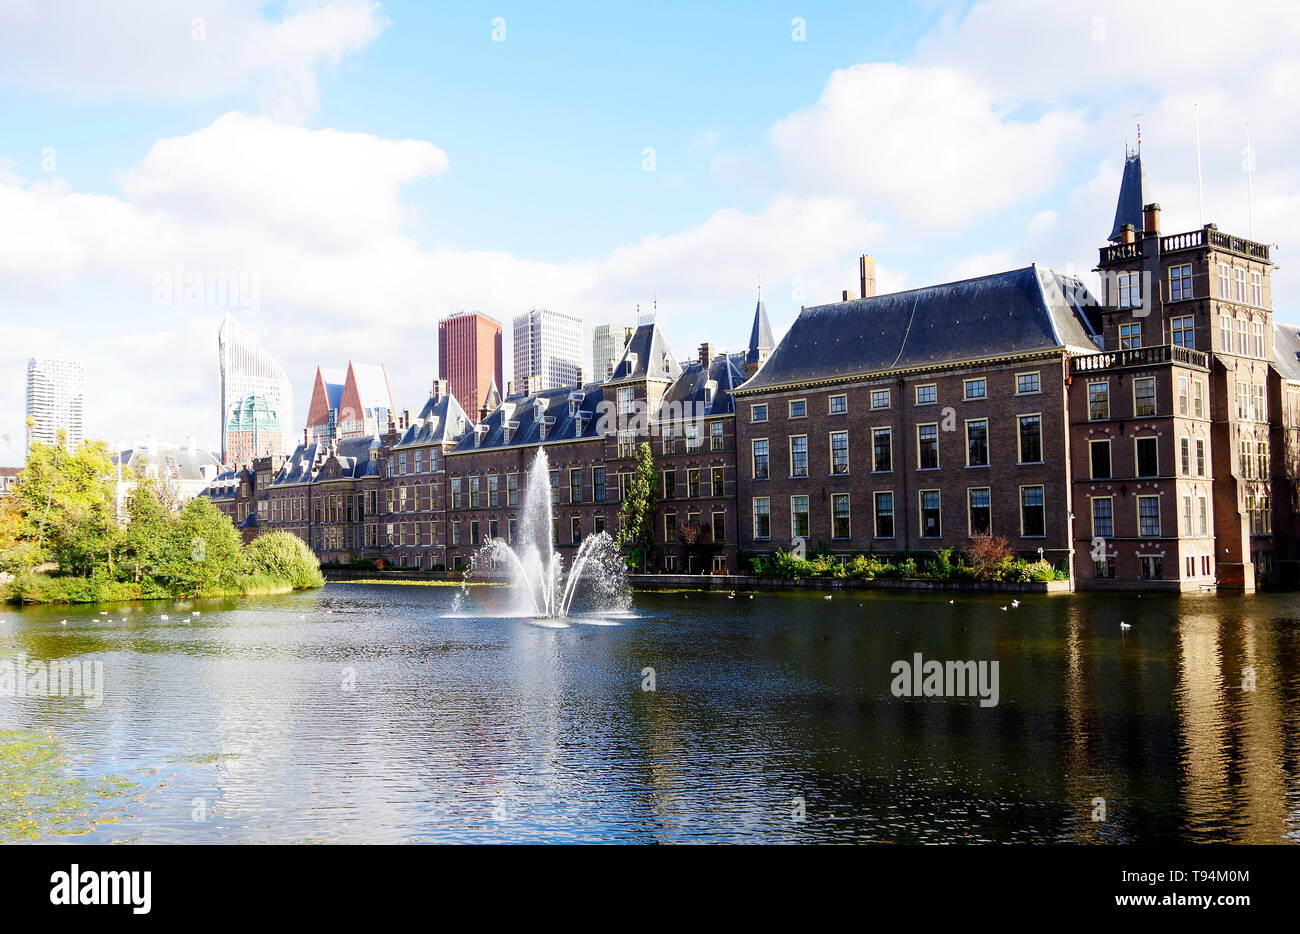 The Binnenhof, the centre of the Dutch Government & Parliament, one of the oldest Parliament buildings still in use, with skyscrapers behind Stock Photo